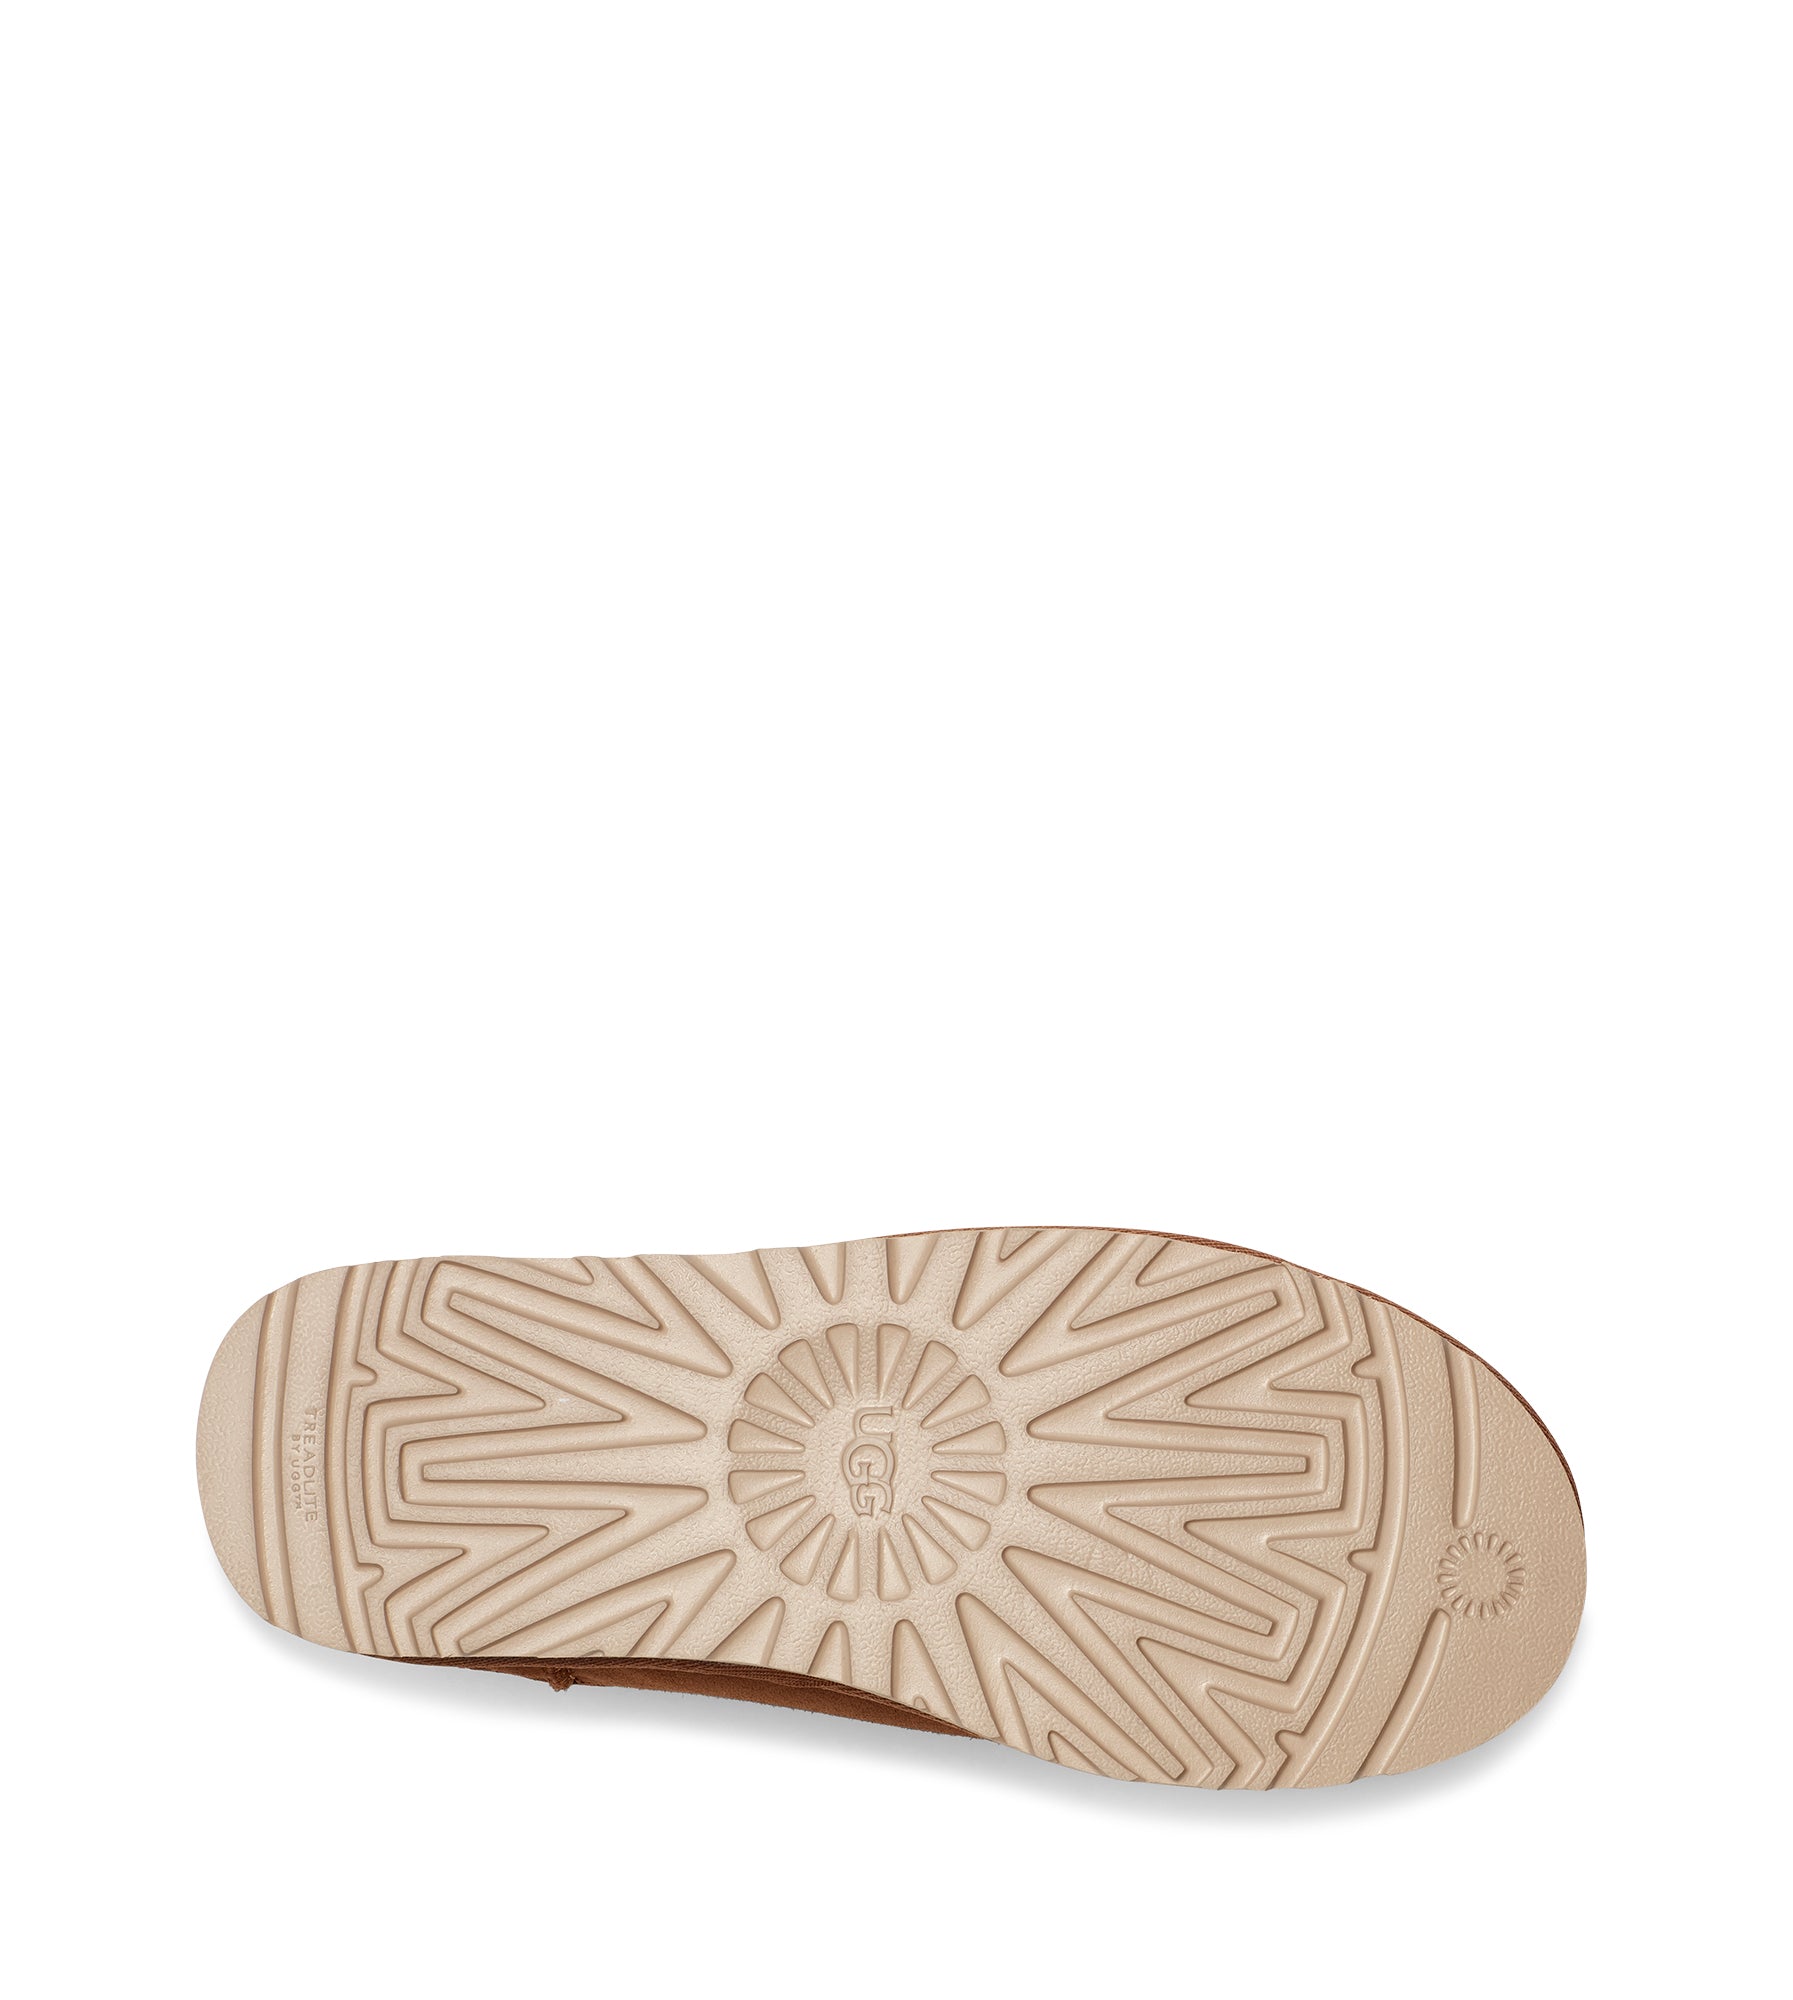 Cache oreille ugg Camel - Pop And Shoes